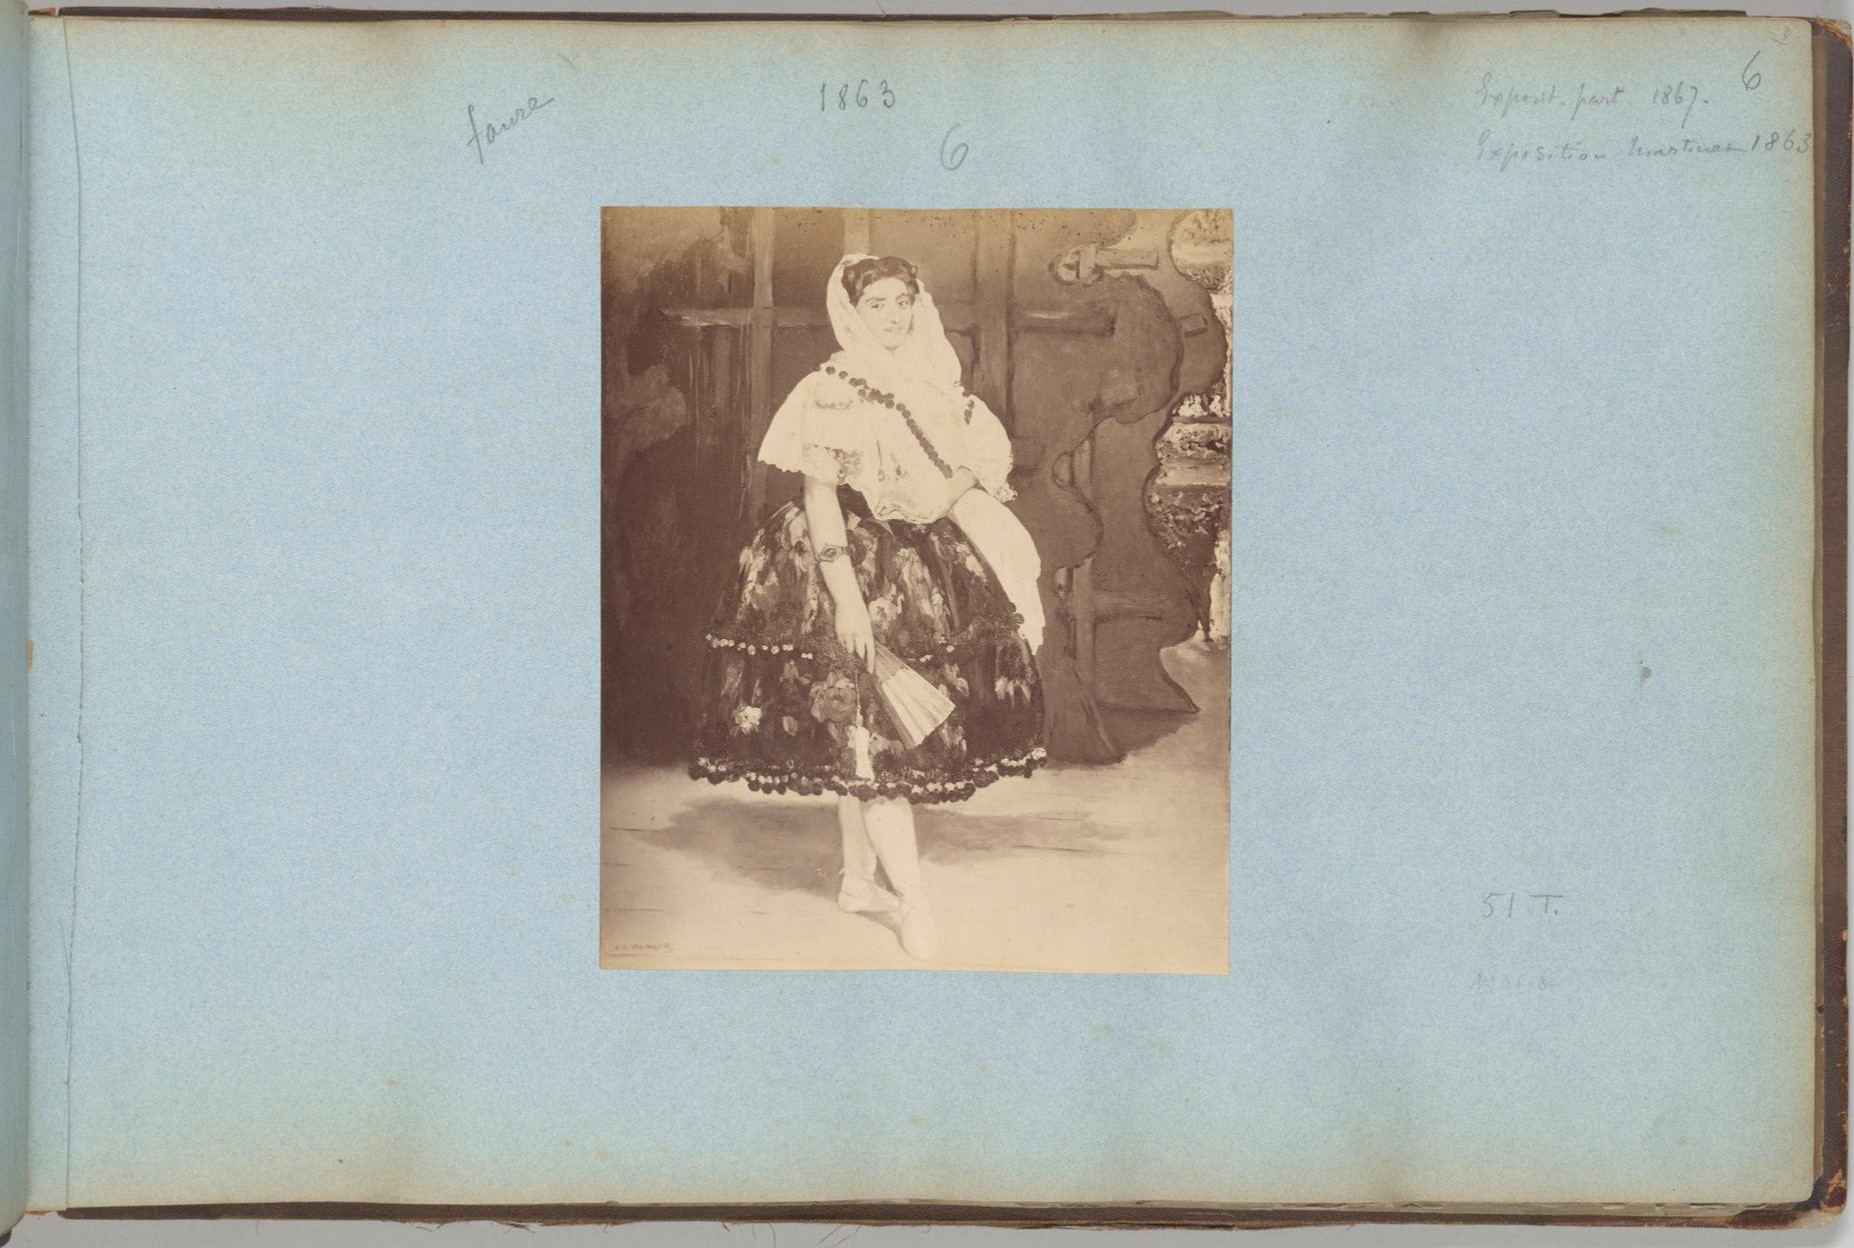 “Albumen photograph of Manet’s painting, Lola de Valence mounted on the blue pages of an album with annotations.”